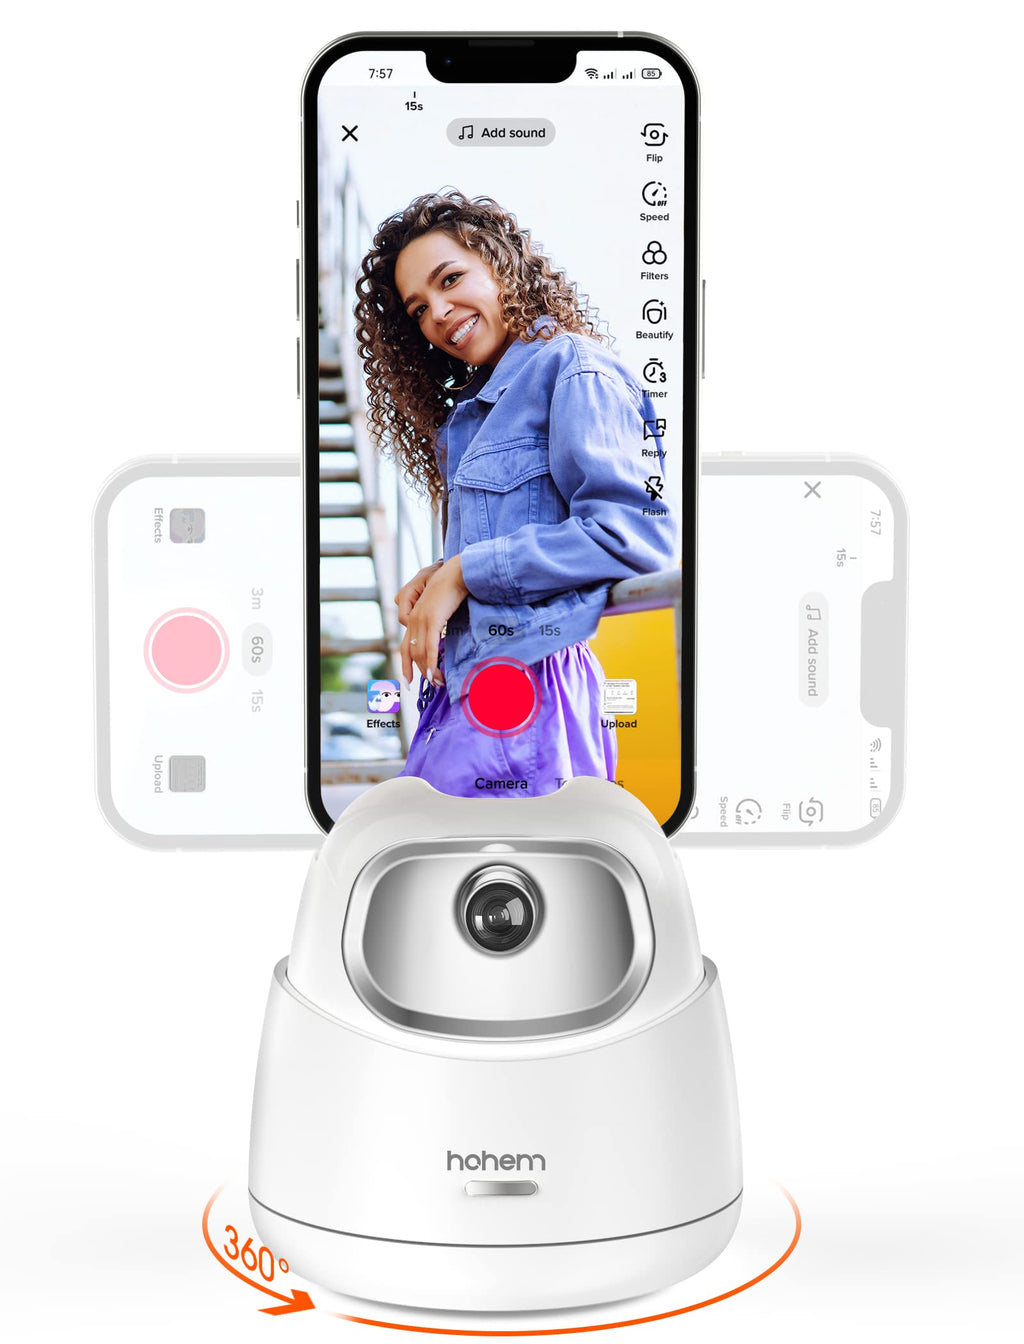  [AUSTRALIA] - Auto Face Tracking Tripod, 360° Rotation Selfie Stand for Phone & Tablet, Smart Tracking Phone Holder with Gesture Control, No App Needed, Tracking Holder for Live Vlog, Rechargeable Battery, hohem Go Auto Tracking Tripod